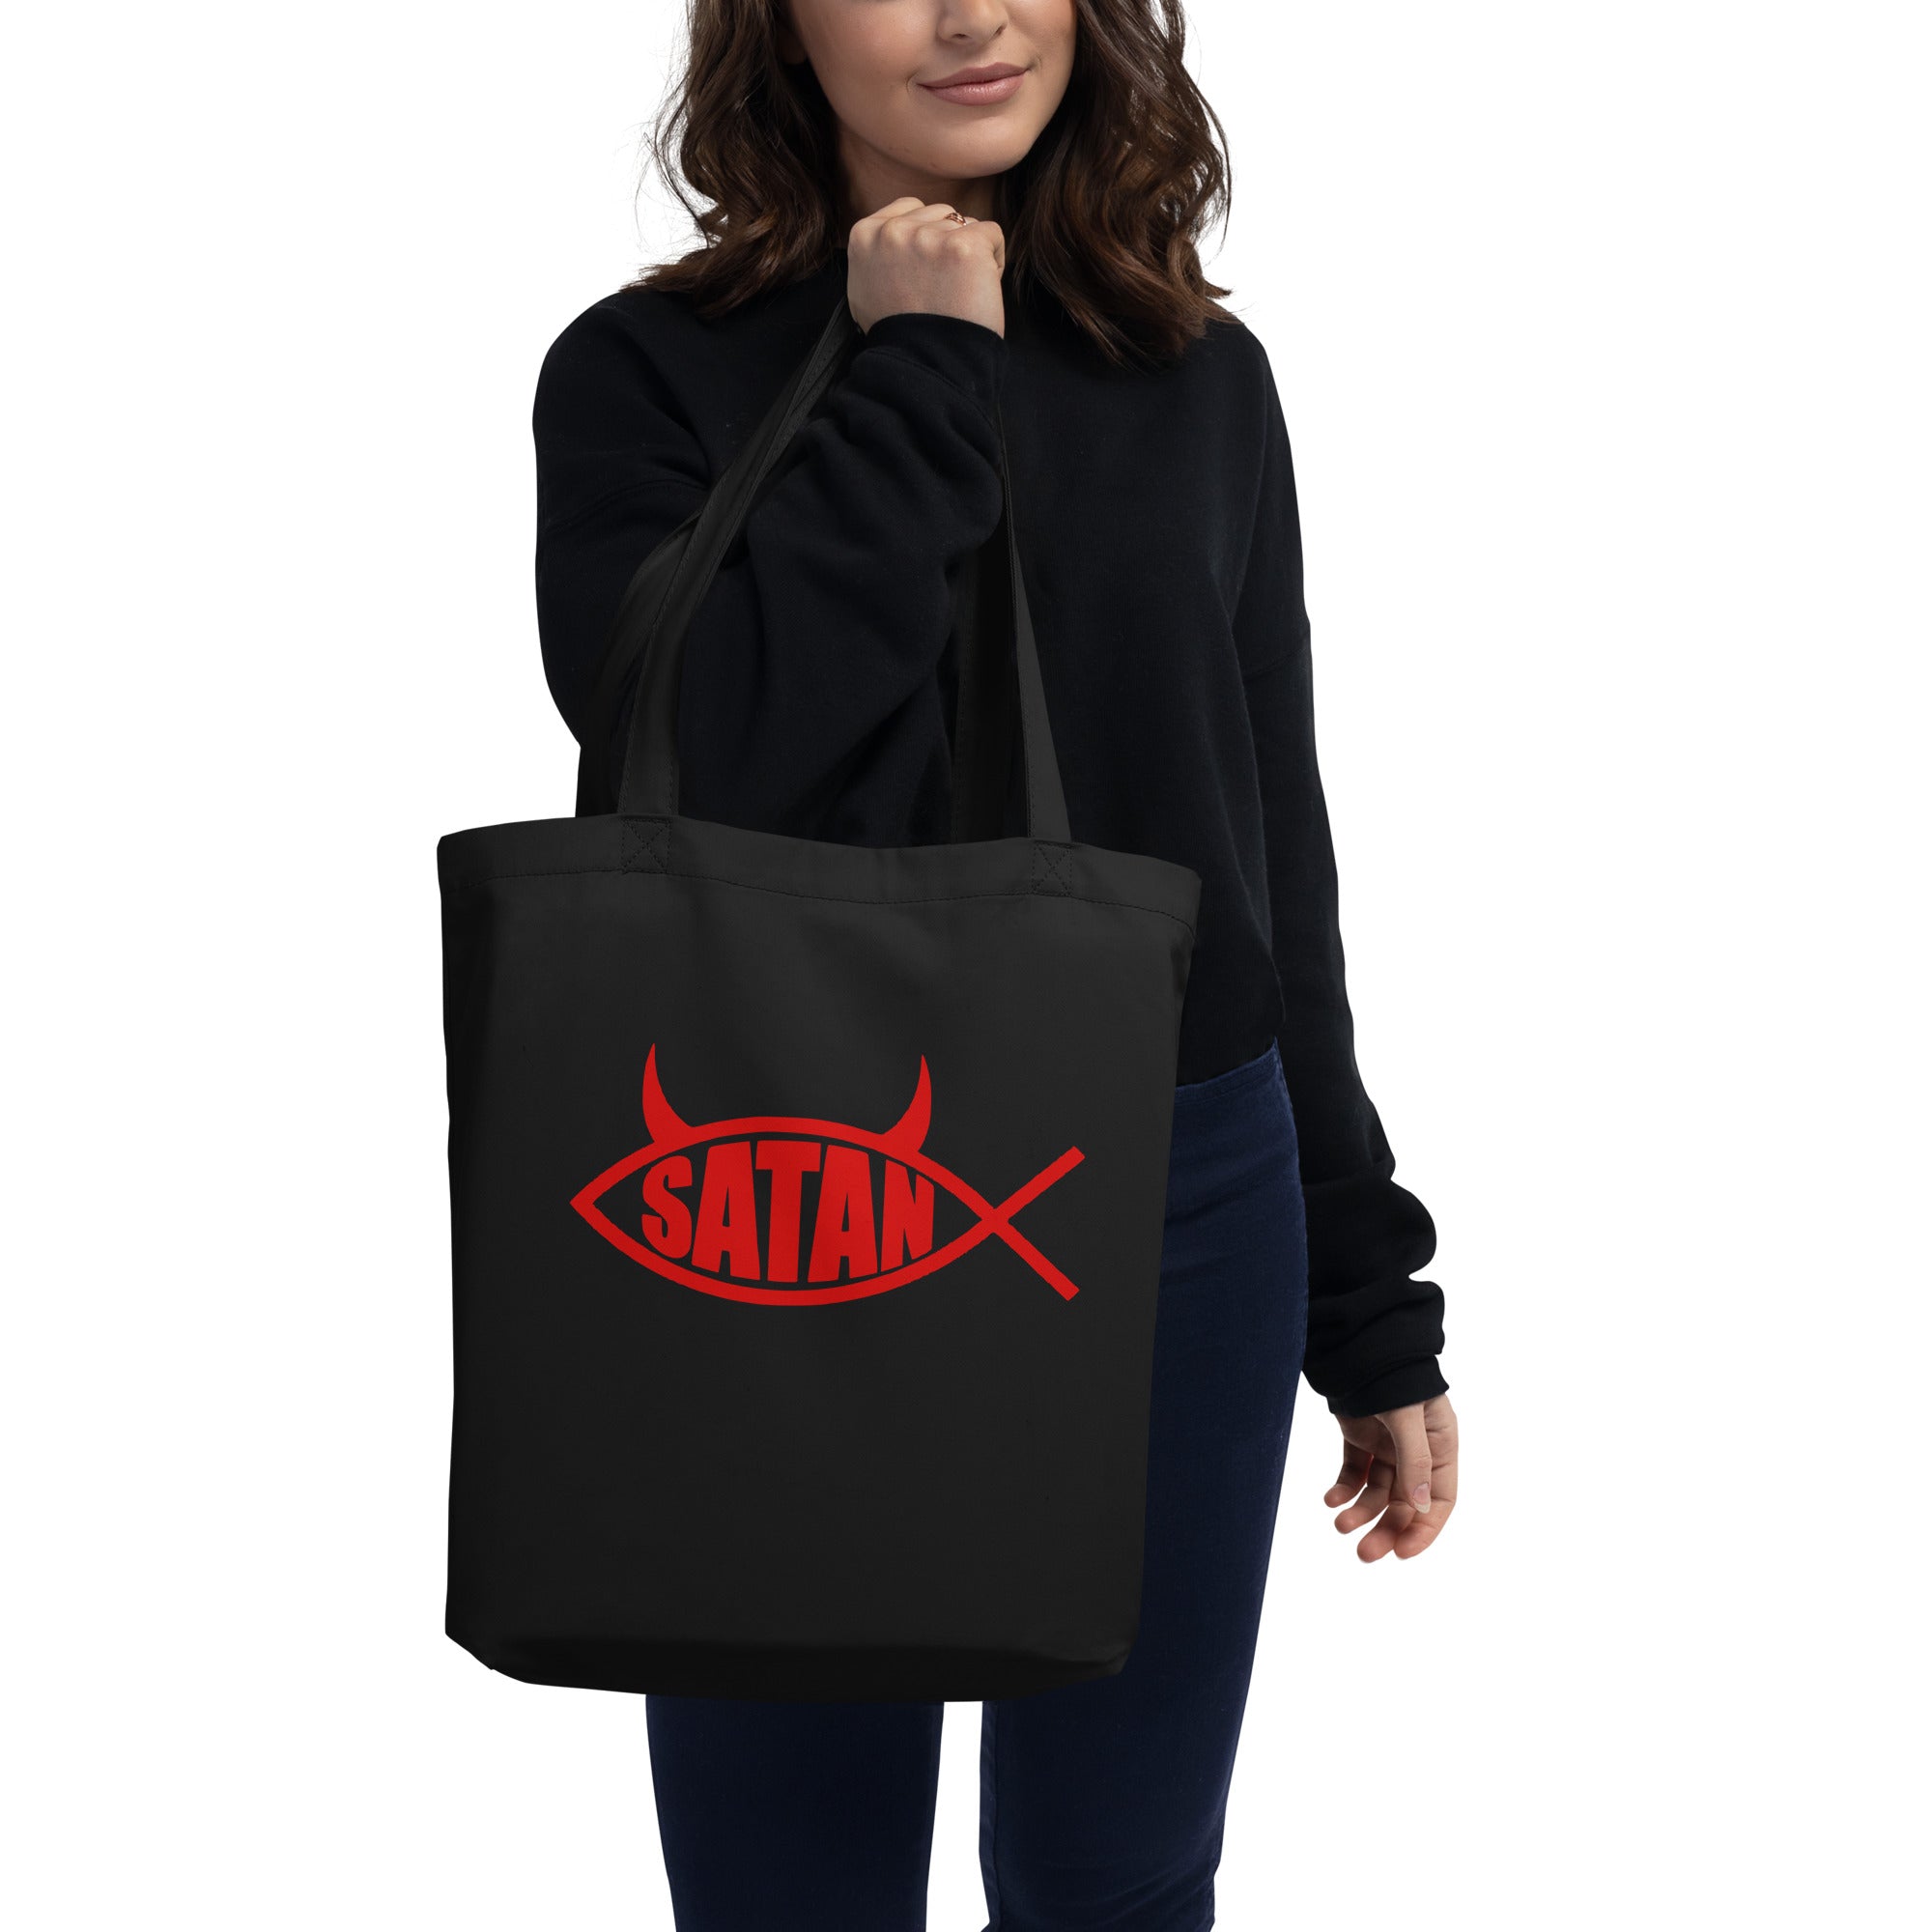 Red Satan Fish with Horns Religious Satire on Jesus Fish Eco Tote Bag - Edge of Life Designs